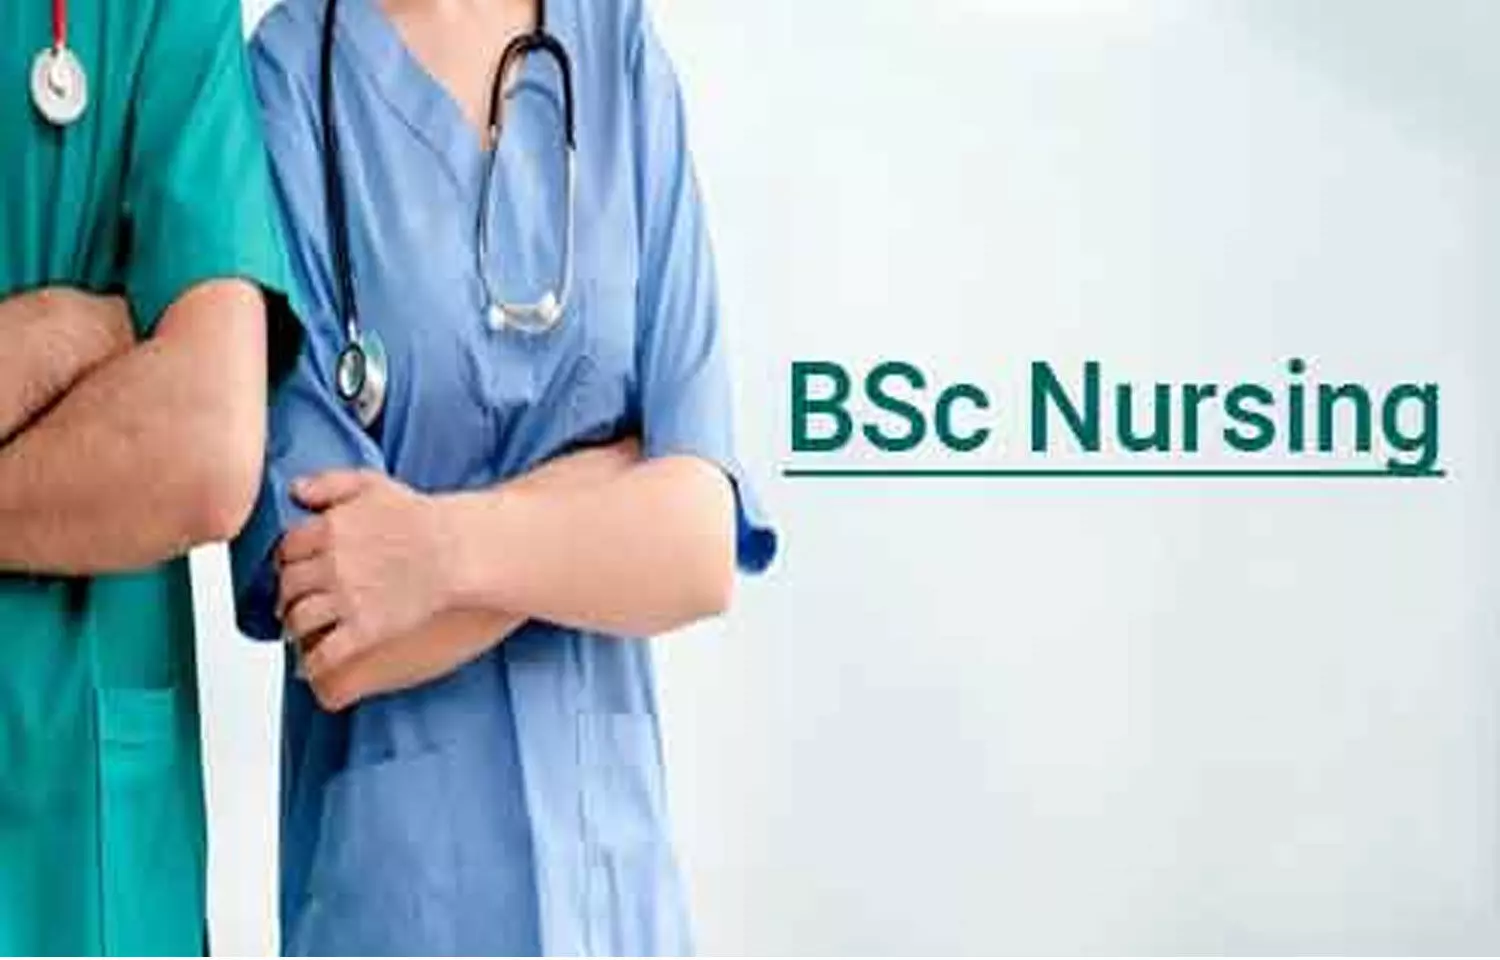 BSc Nursing (4 years, Post Basic) at PGIMER: 31 seats up for grabs in Round 2 Counselling